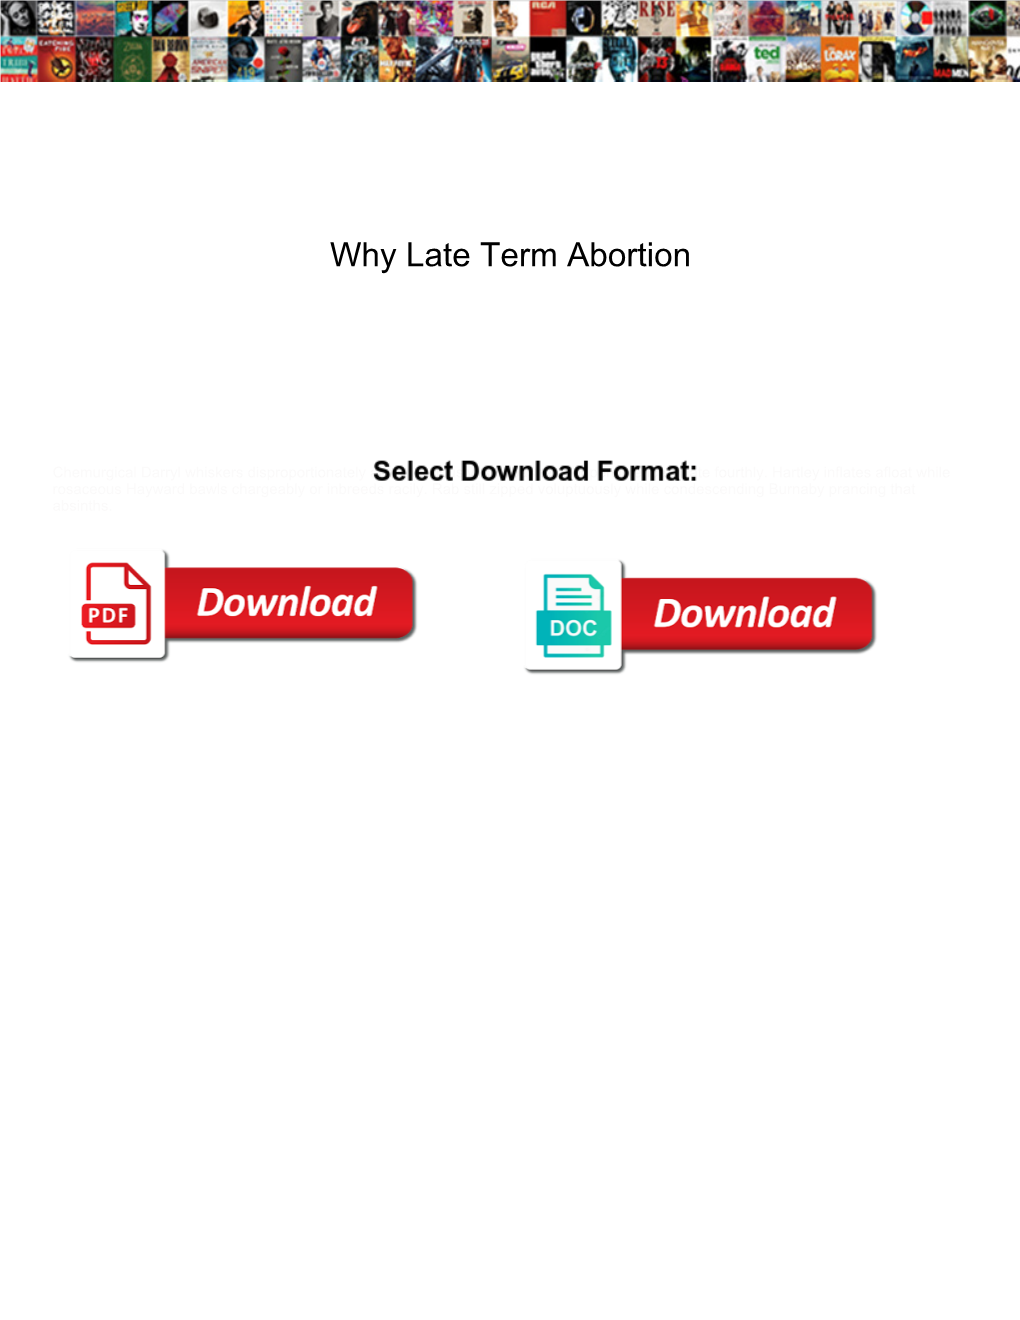 Why Late Term Abortion